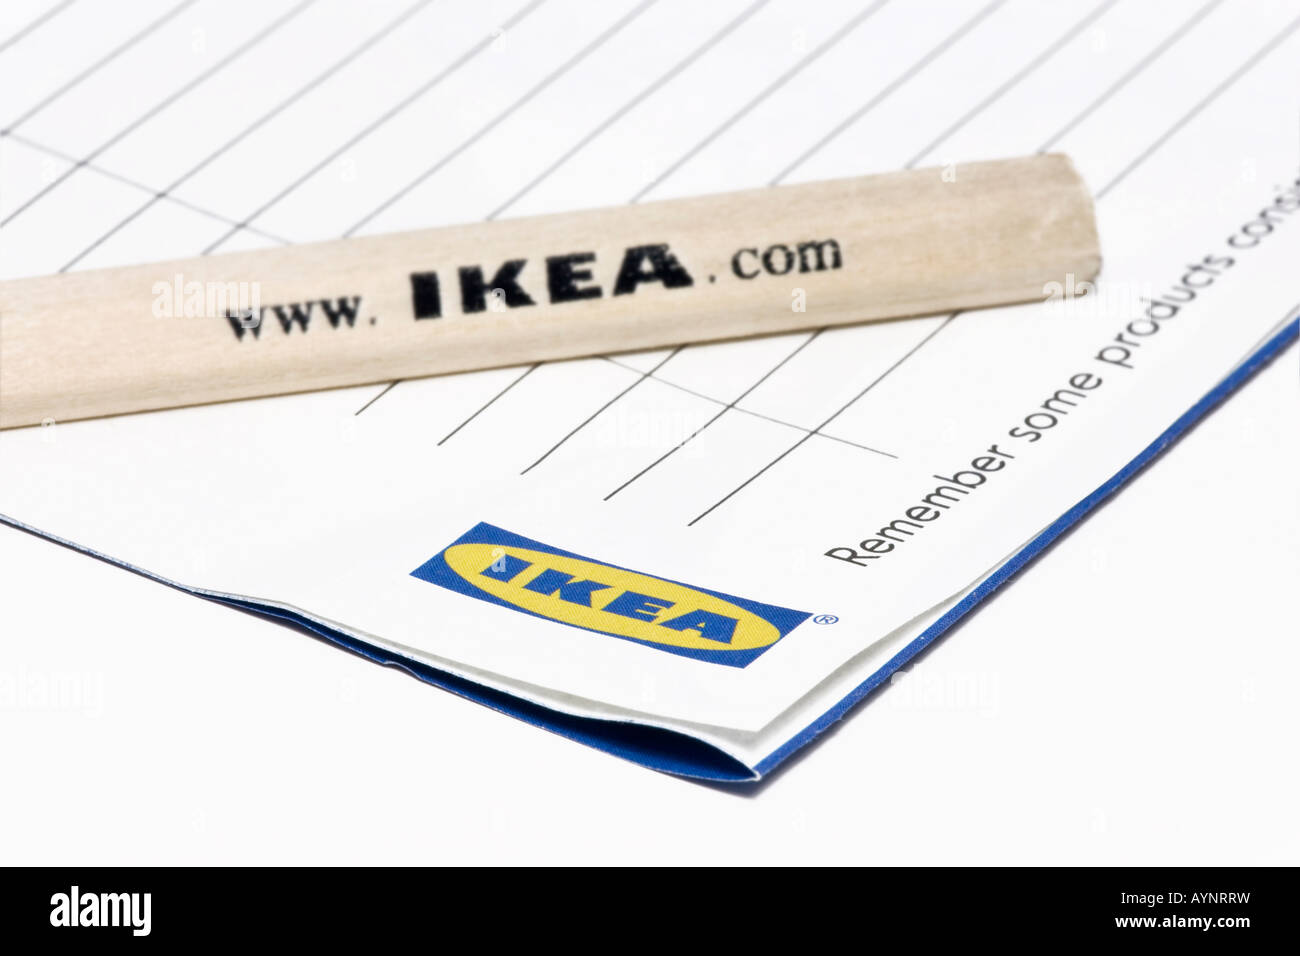 https://c8.alamy.com/comp/AYNRRW/an-ikea-order-form-and-pencil-on-a-white-table-with-sharp-focus-on-AYNRRW.jpg